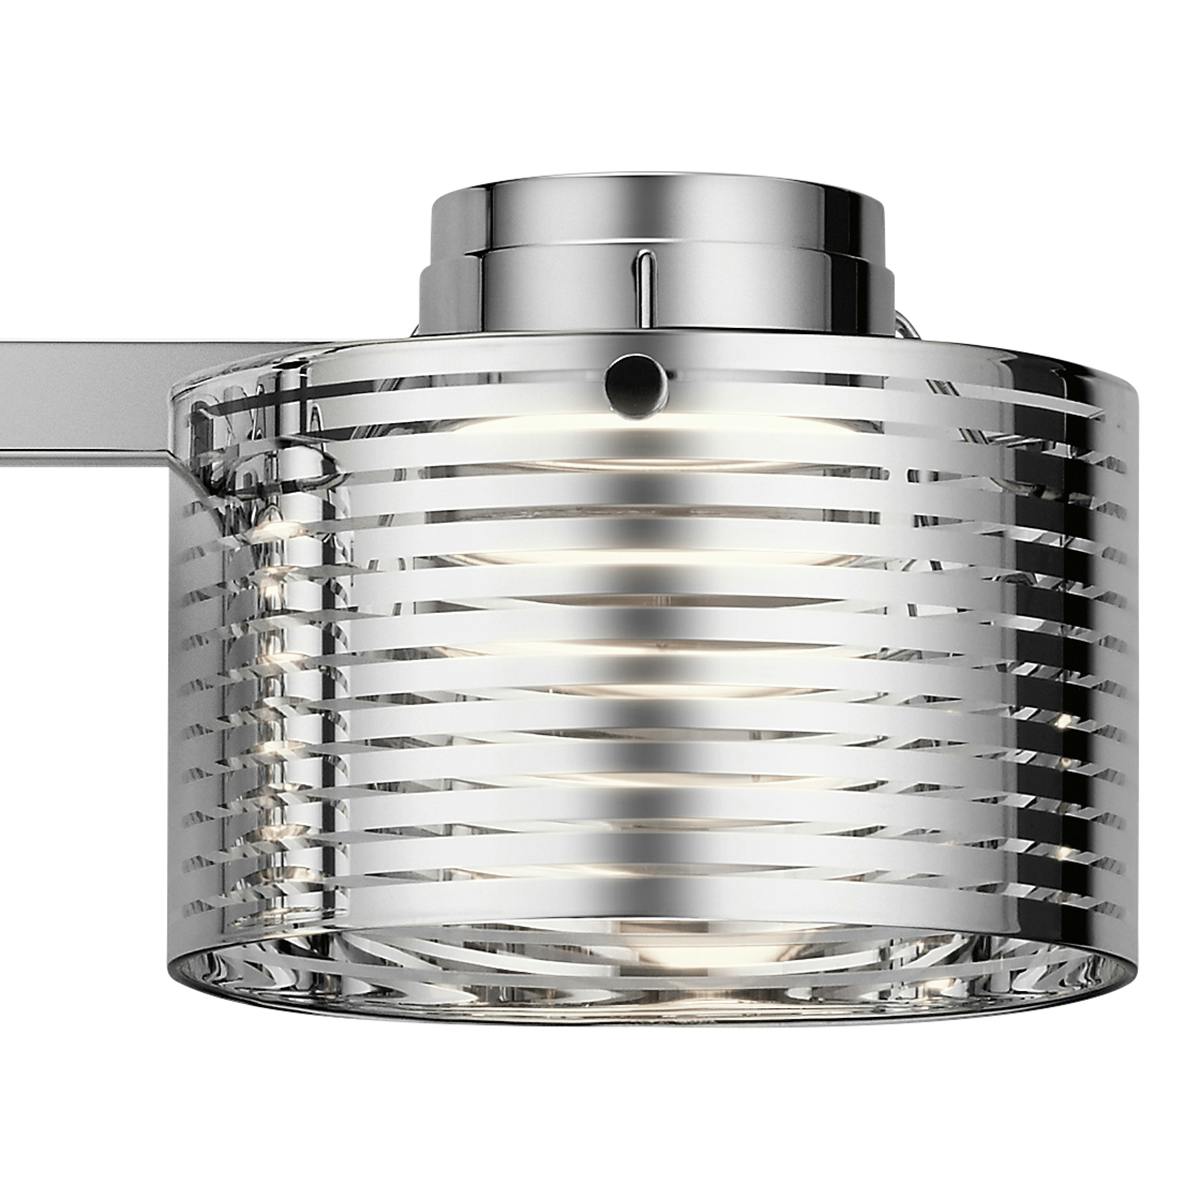 Close up view of the Santora 3000K 4 Light Vanity Light Chrome on a white background